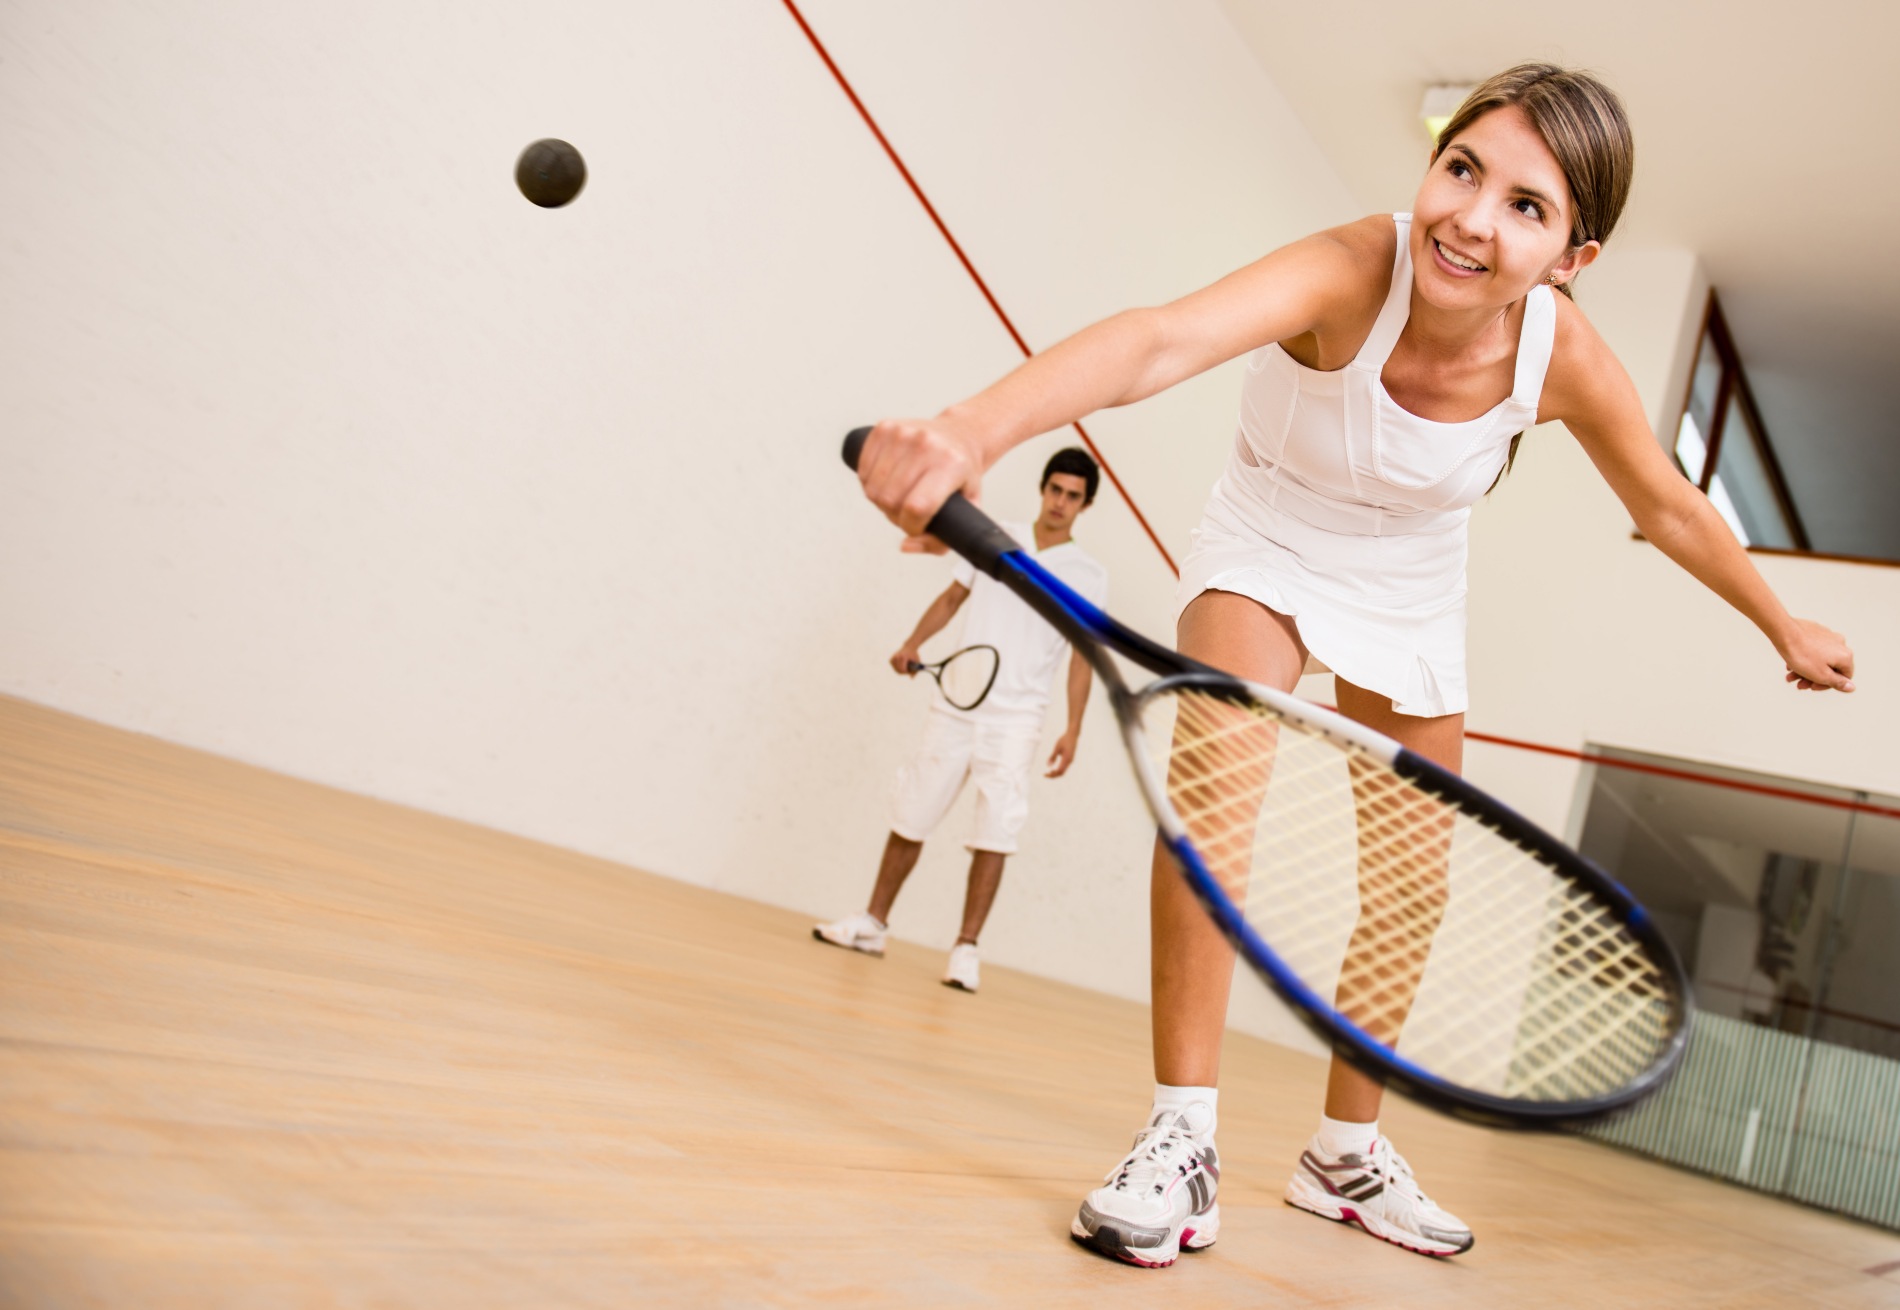 Young lady doing a back hand to return ball in a game of squash